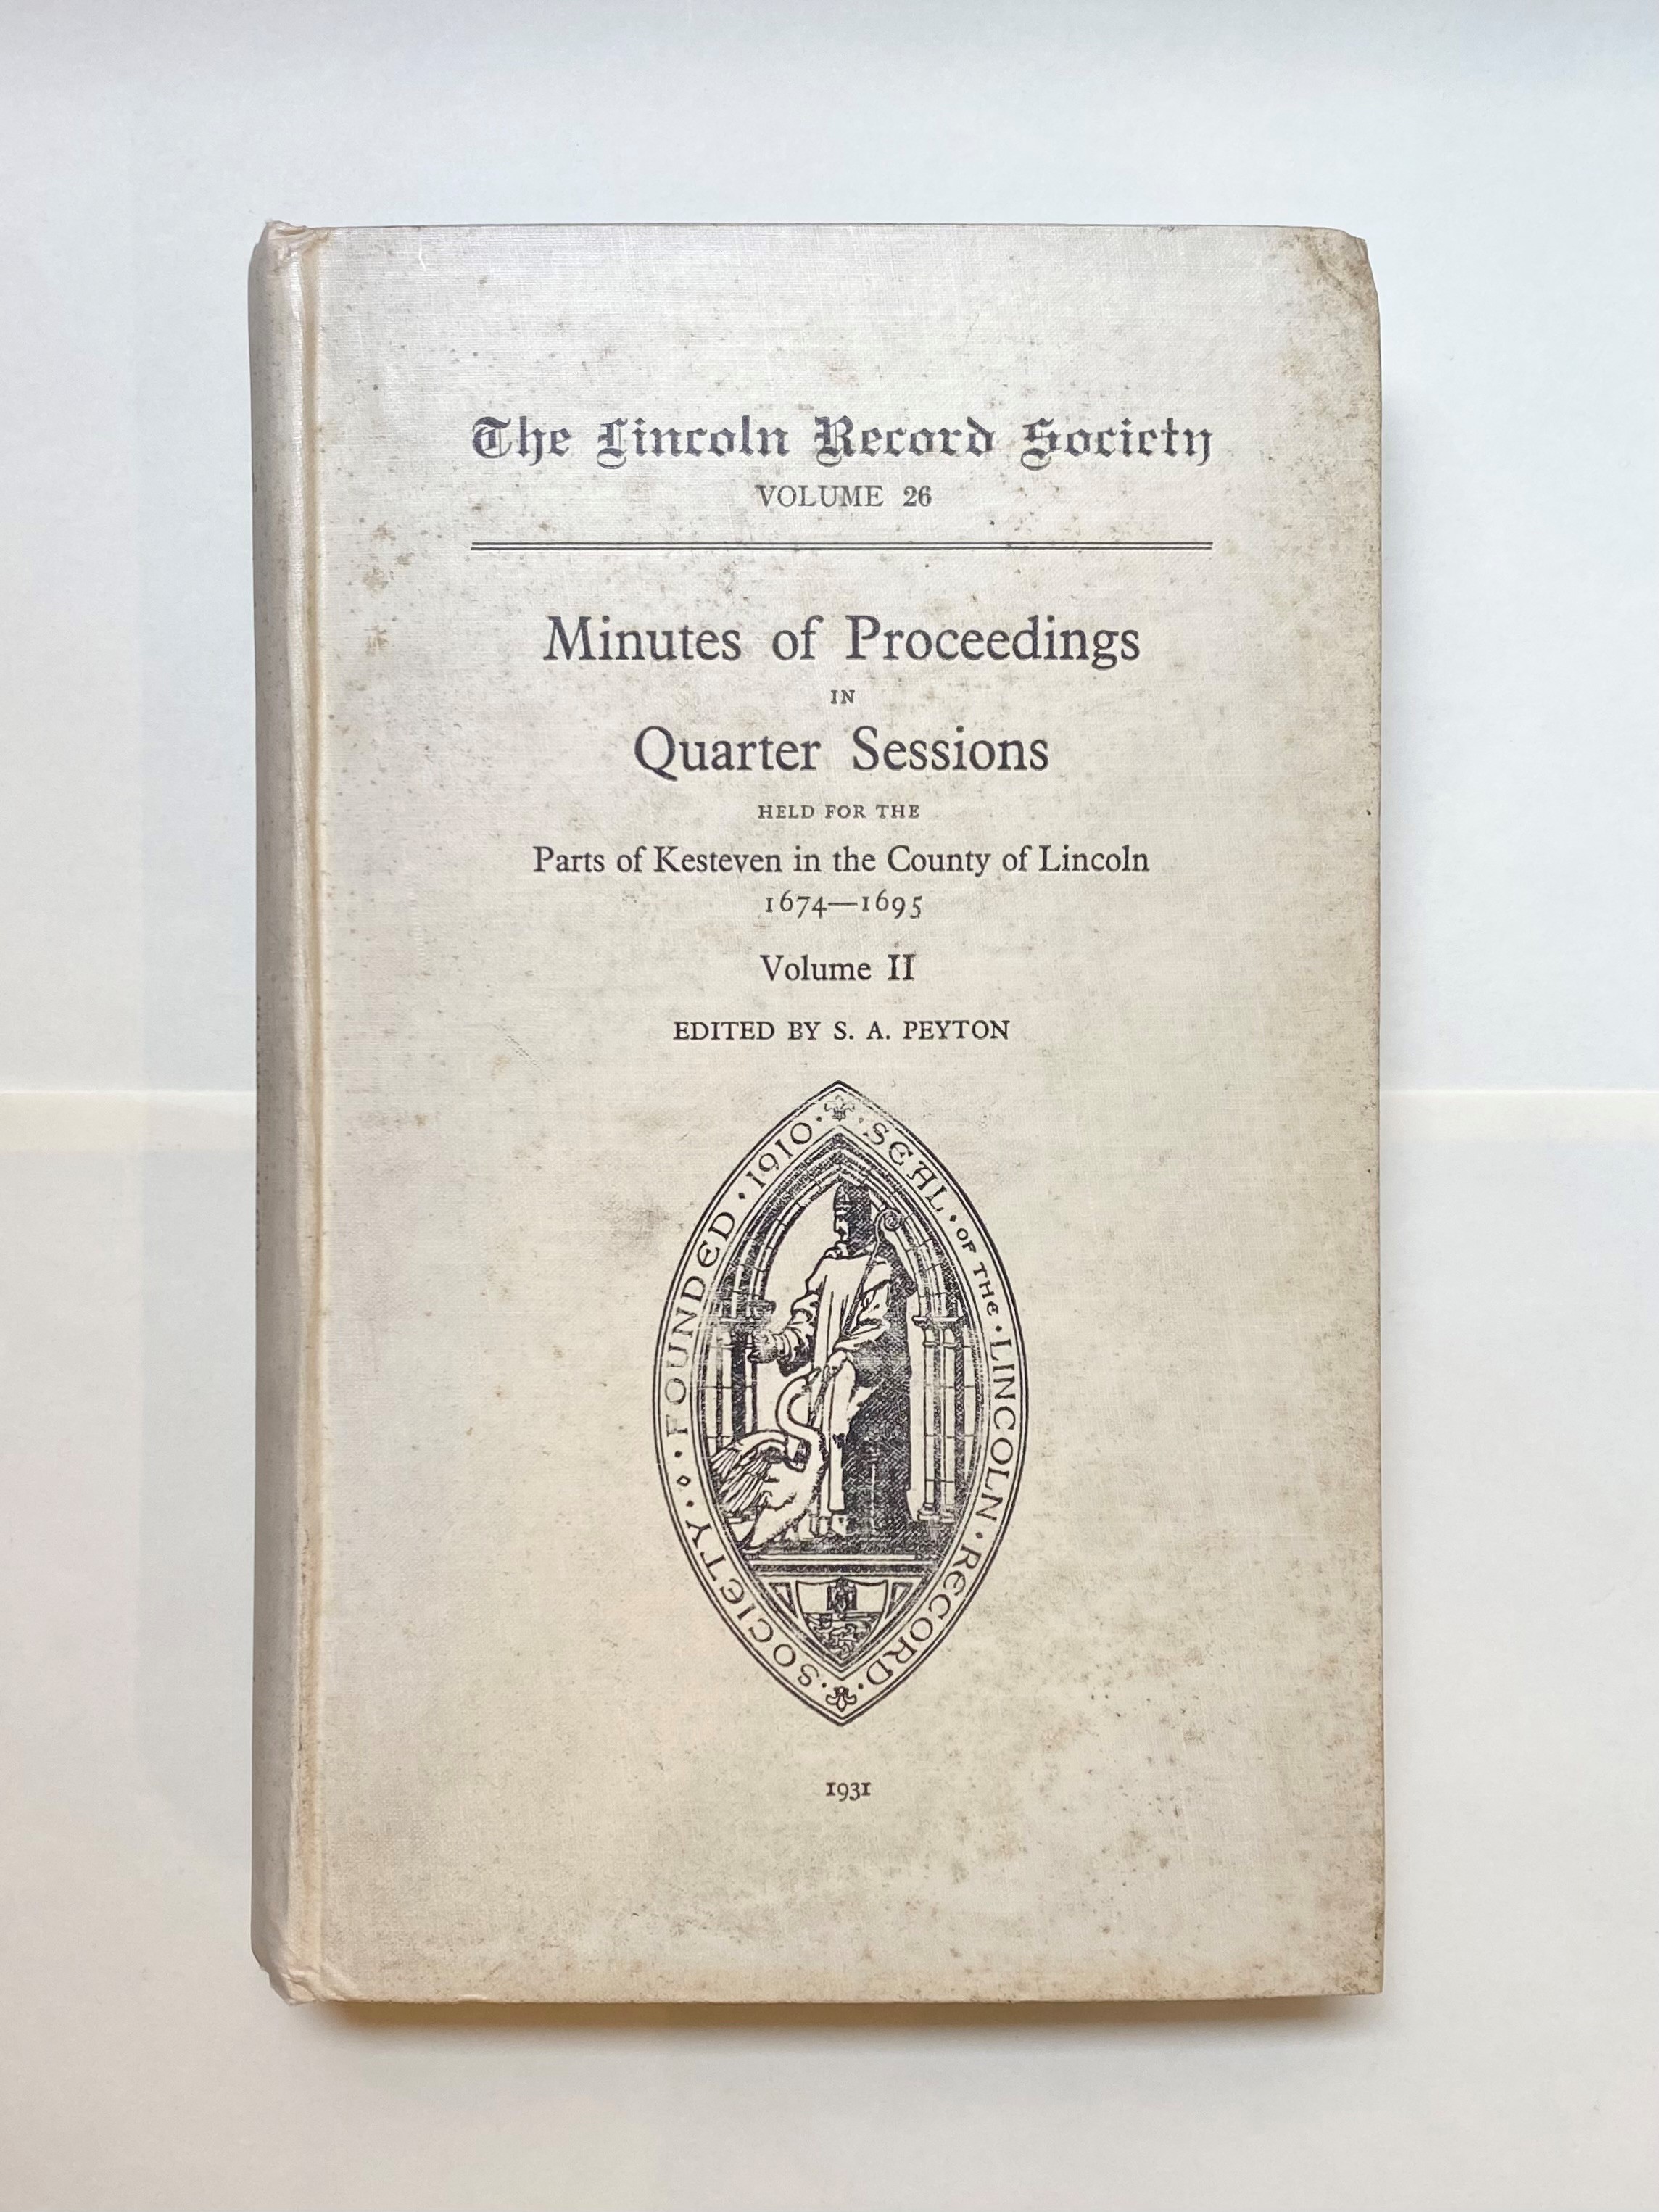 The Lincoln Record Society Volume 26: Minutes of Proceedings in Quarter Sessions Held for the Parts of Kesteven in the County of Lincoln 1674-1695 Edited by S. A. Peyton